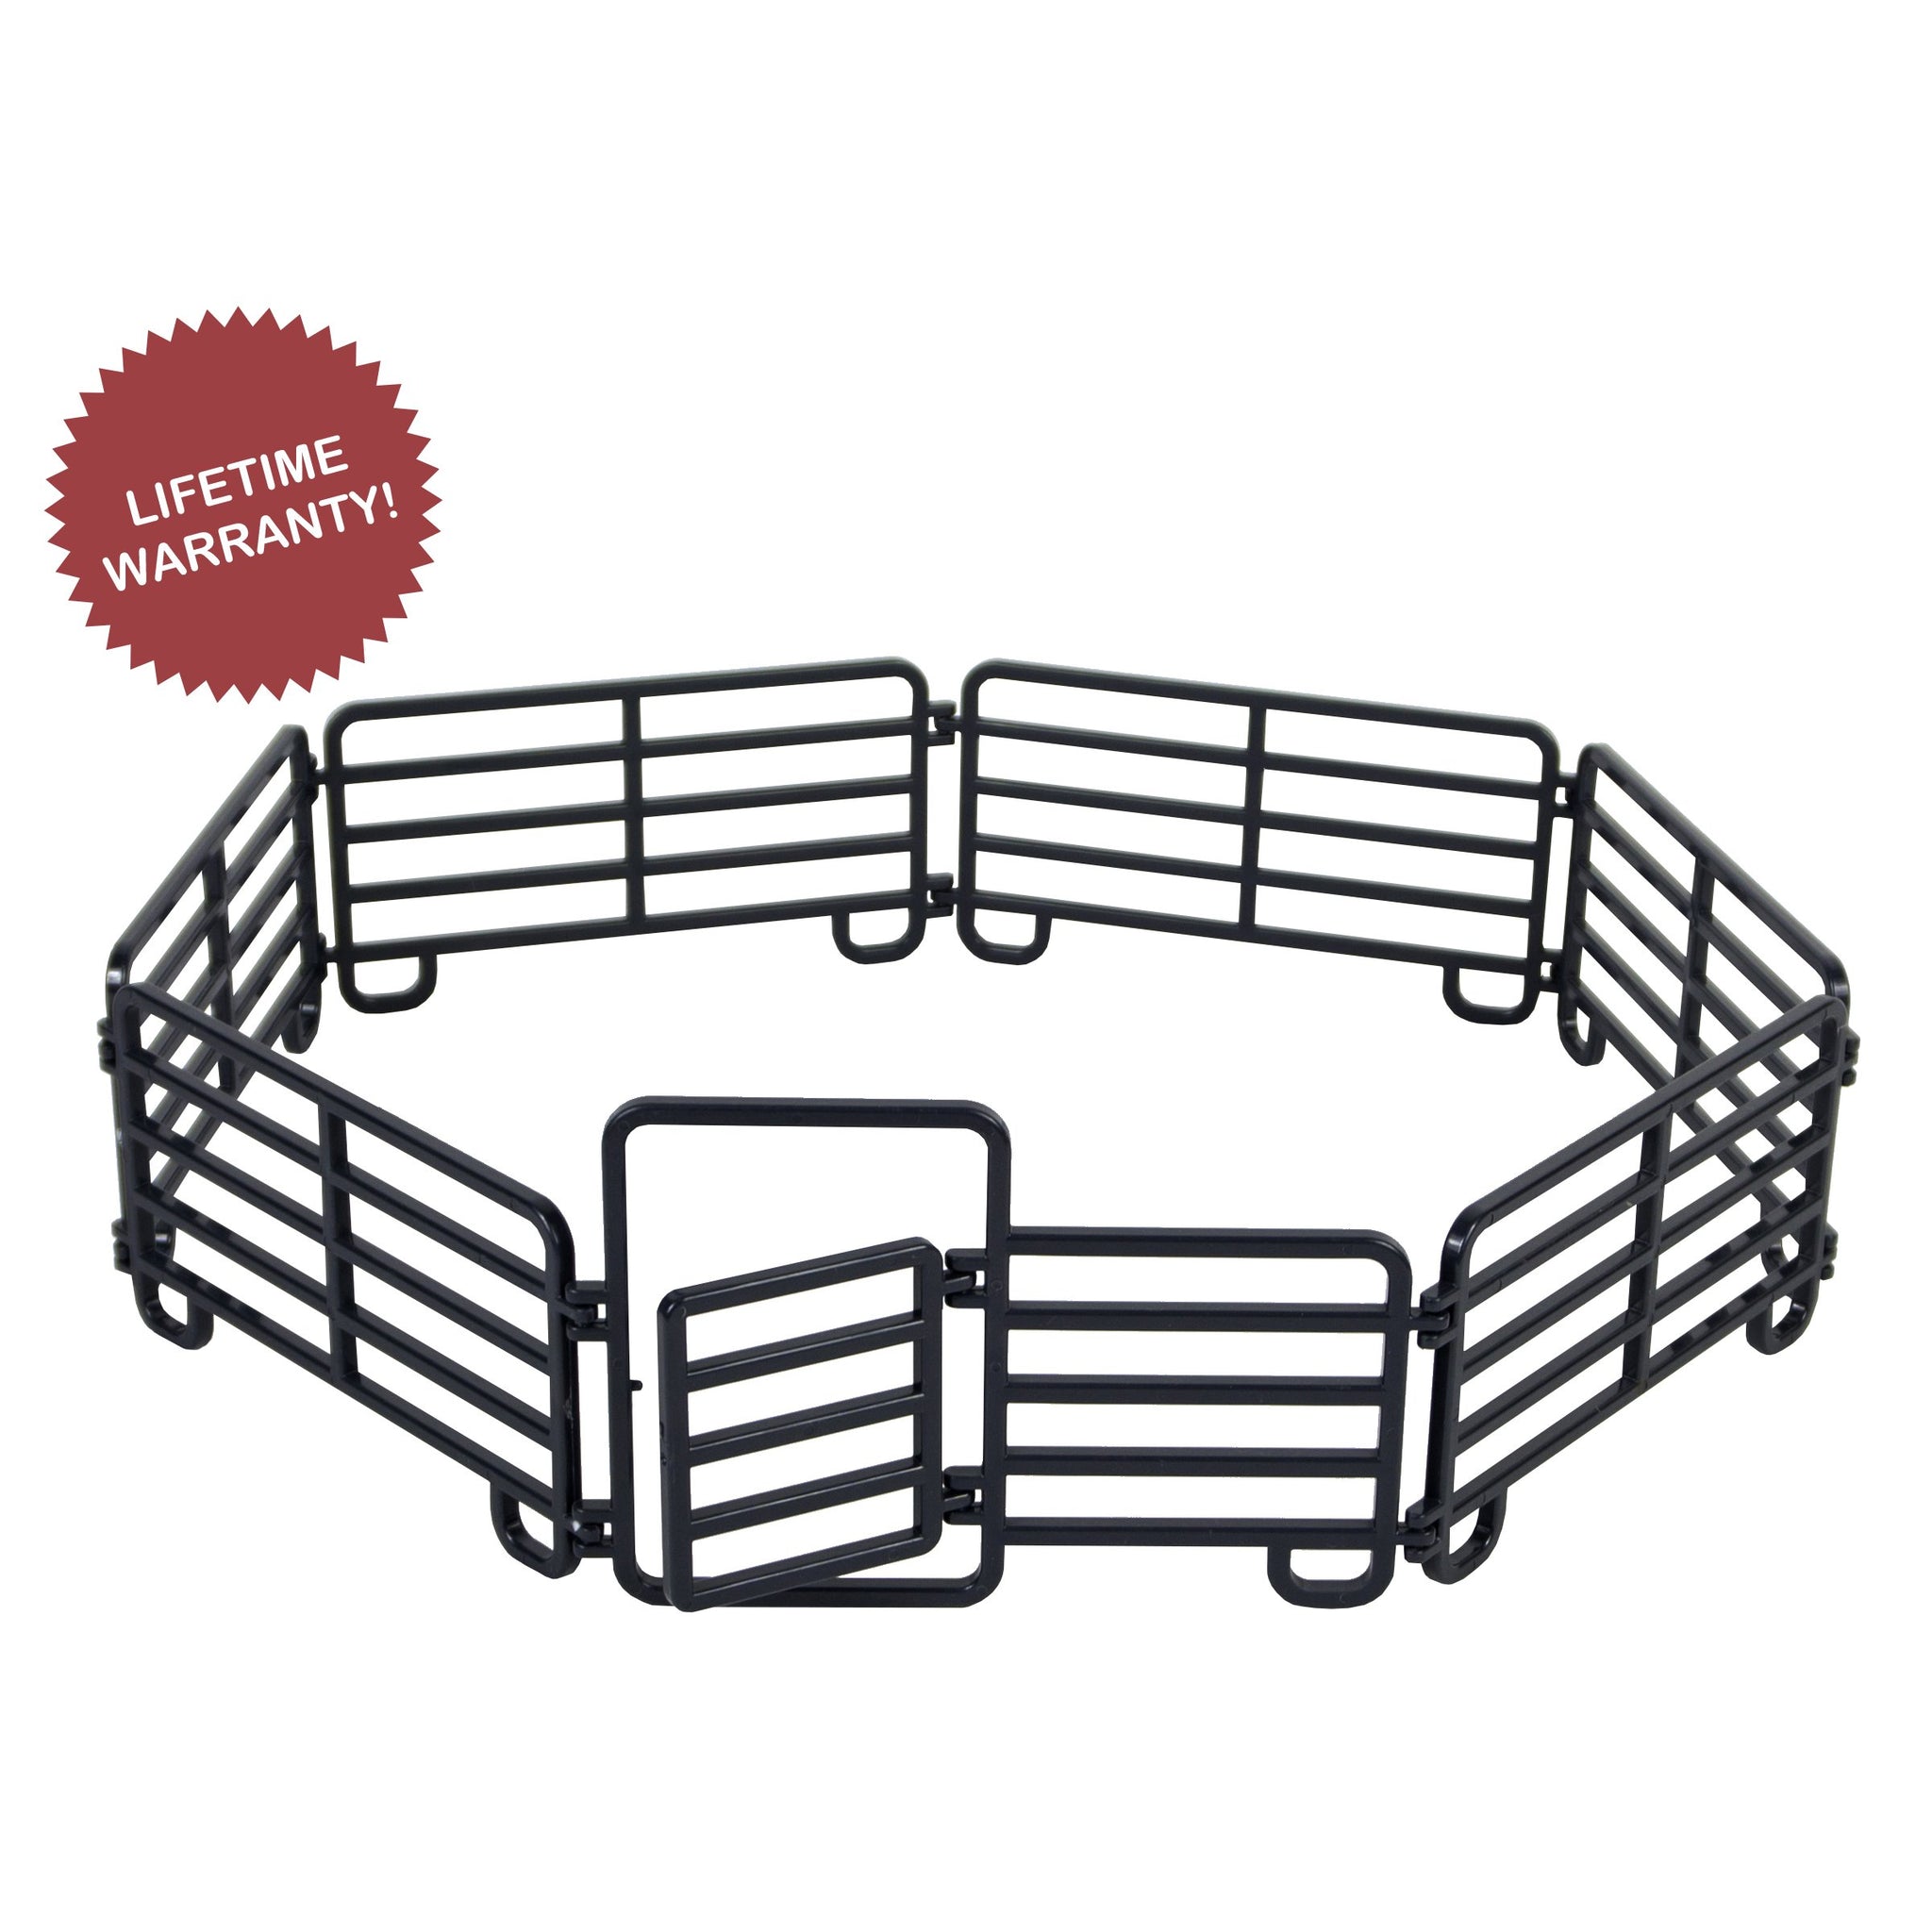 7 Piece Toy Corral Fence